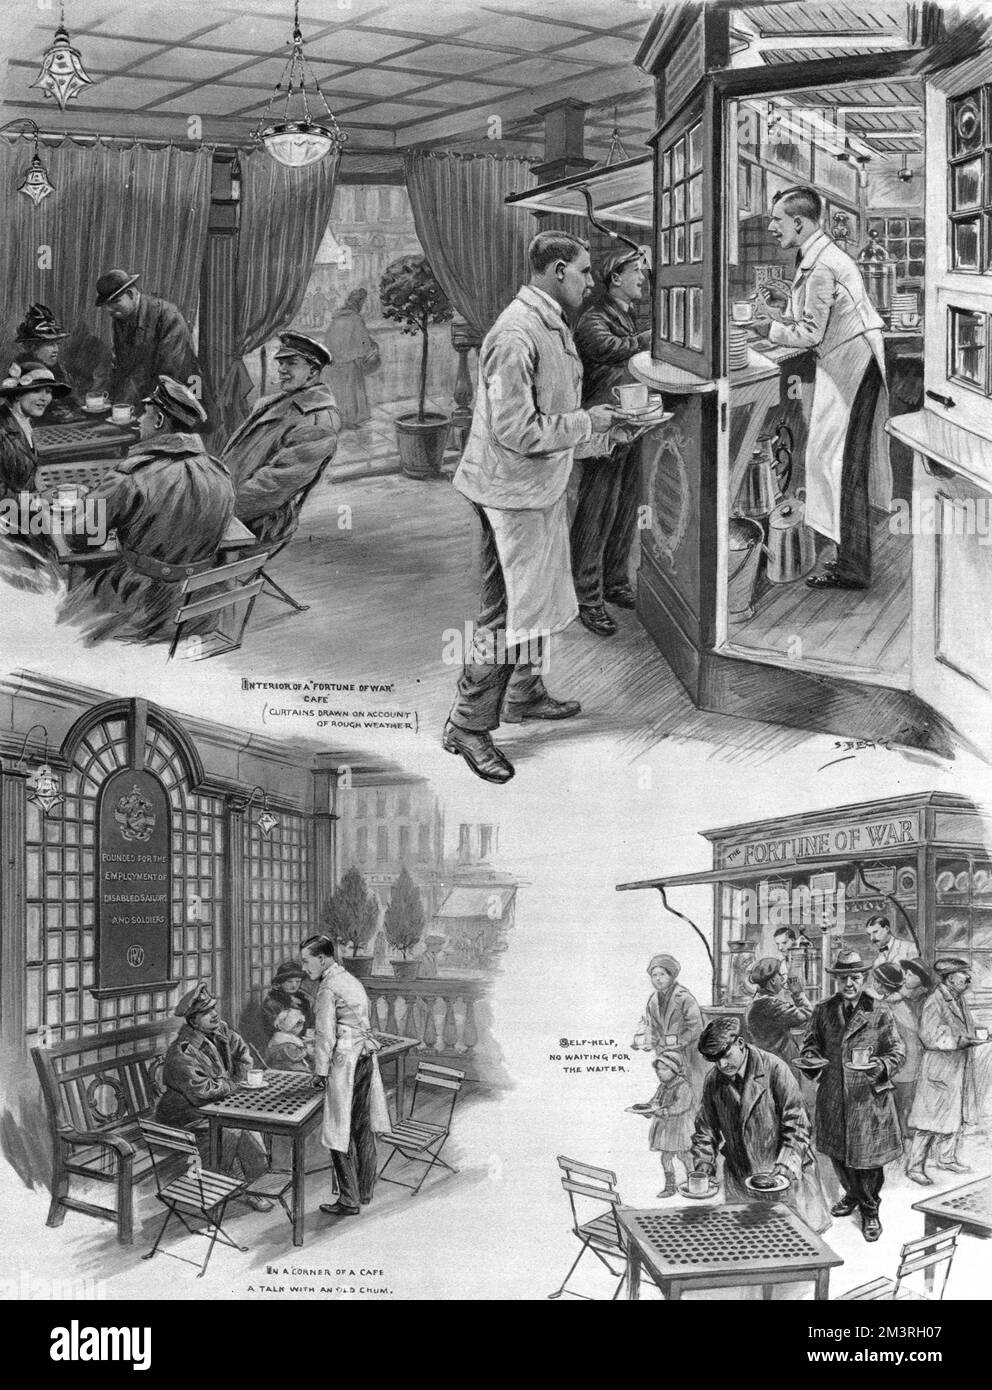 Page of illustrations by Samuel Begg in The Illustrated London News, depicting scenes at a Fortune of War caf&#x9829;n London.  The idea for the cafes was thought up by Lieut. J E. Latham (an invalided officers of the South Staffordshire Territorials) and they were intended to provide 'congenial and well-paid employment to disabled men.'  The first began in Kilburn and was followed by cafes in Hackney, Aldgate and Edgware Road.  The scheme was run on sound business principles and there was no sense of charity.  Each caf&#x9823;ost about 400 to set up.  The men employed received 2 a week with f Stock Photo